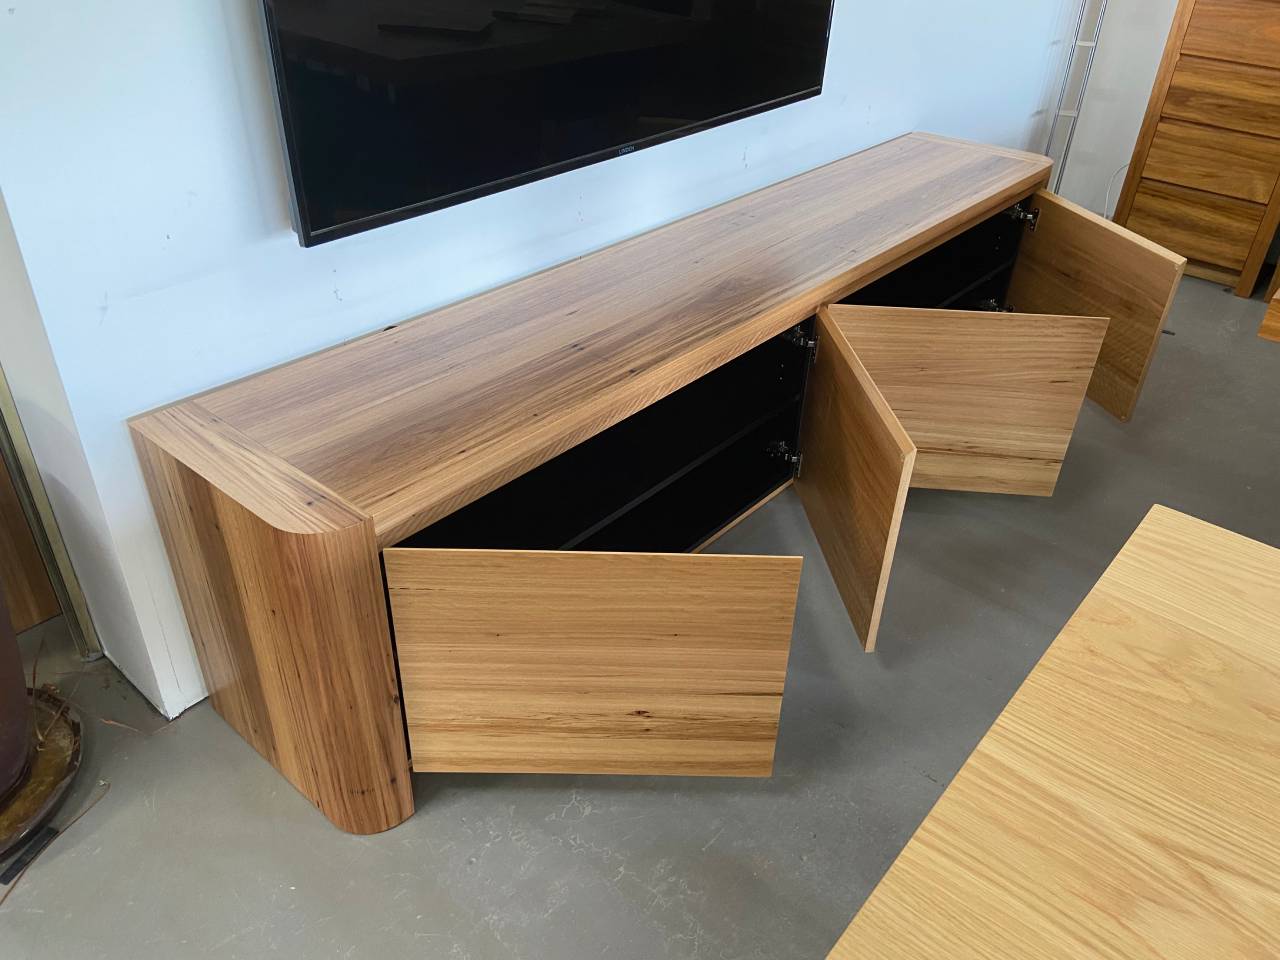 Lilly Media Entertainment Unit 4 Door Blackbutt Timber Made in Adelaide, South Australia